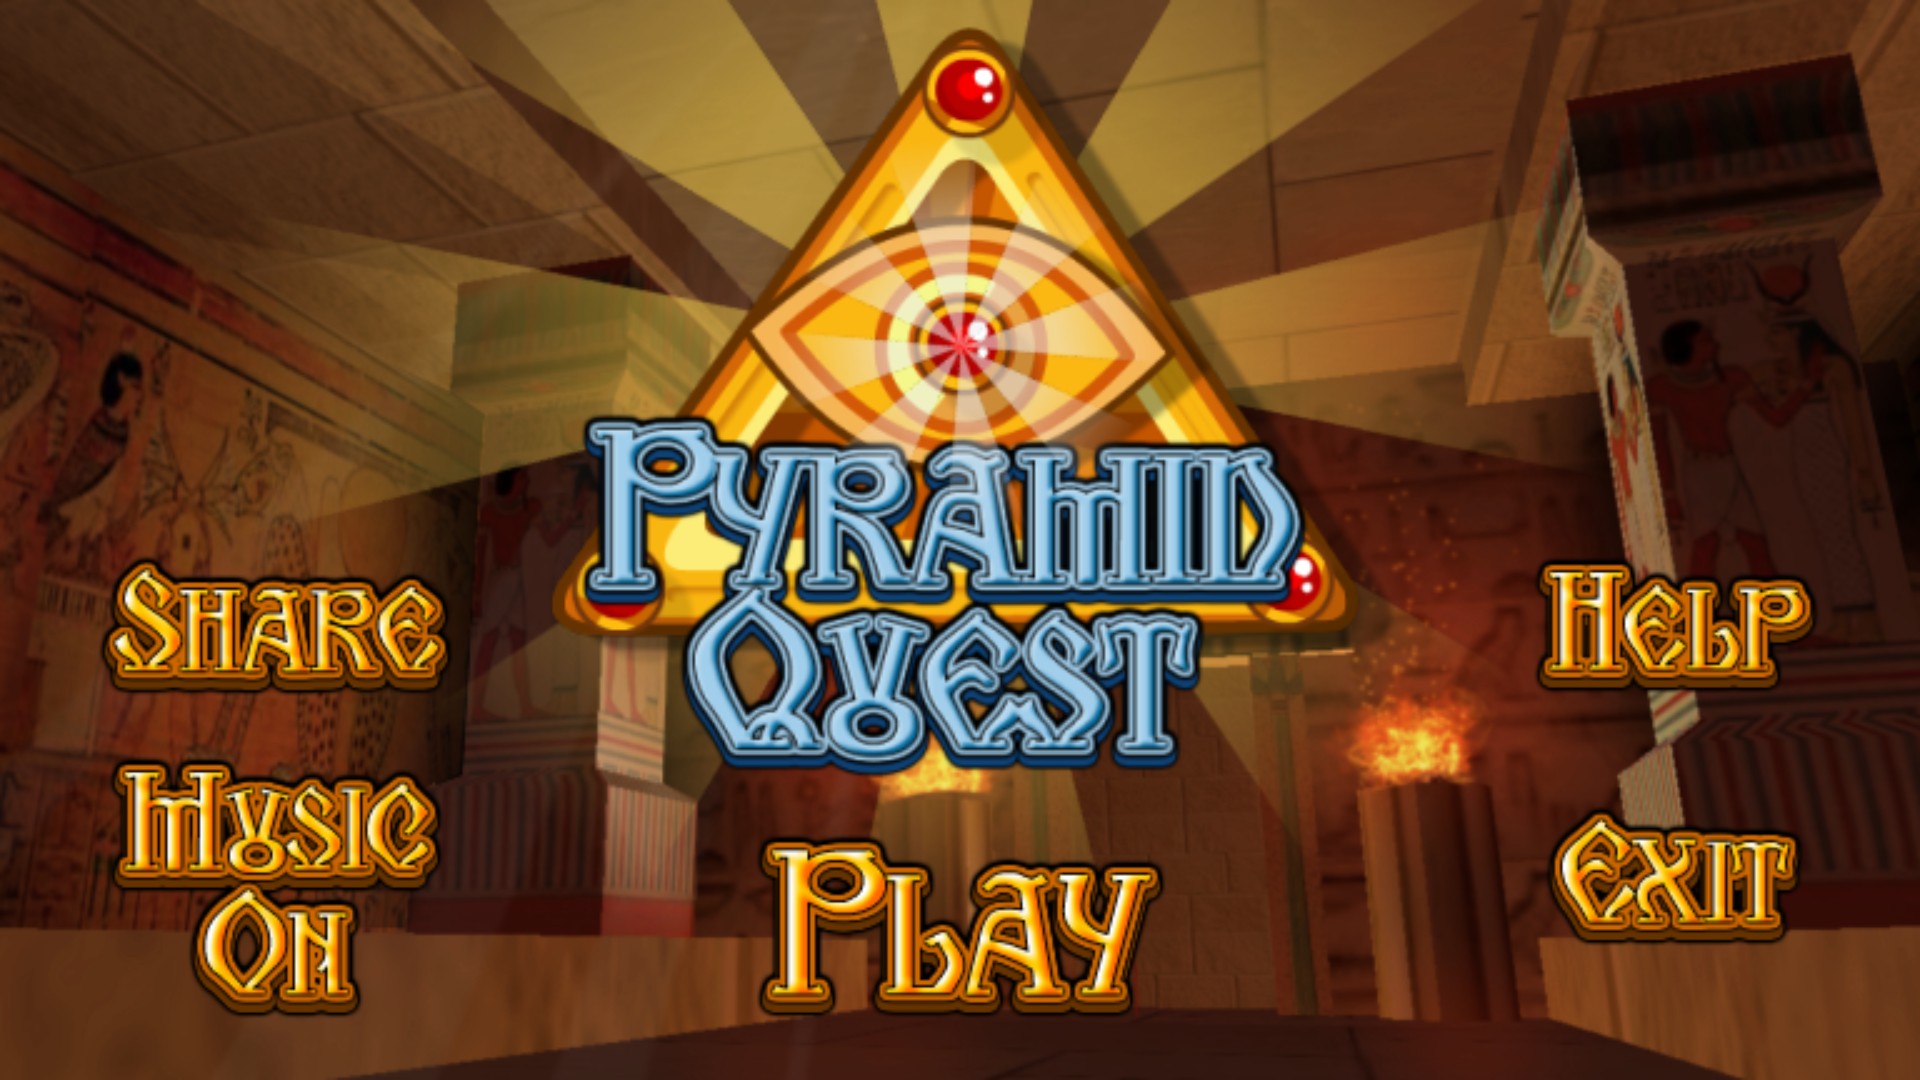 ancient quest of saqqarah download for android mobile